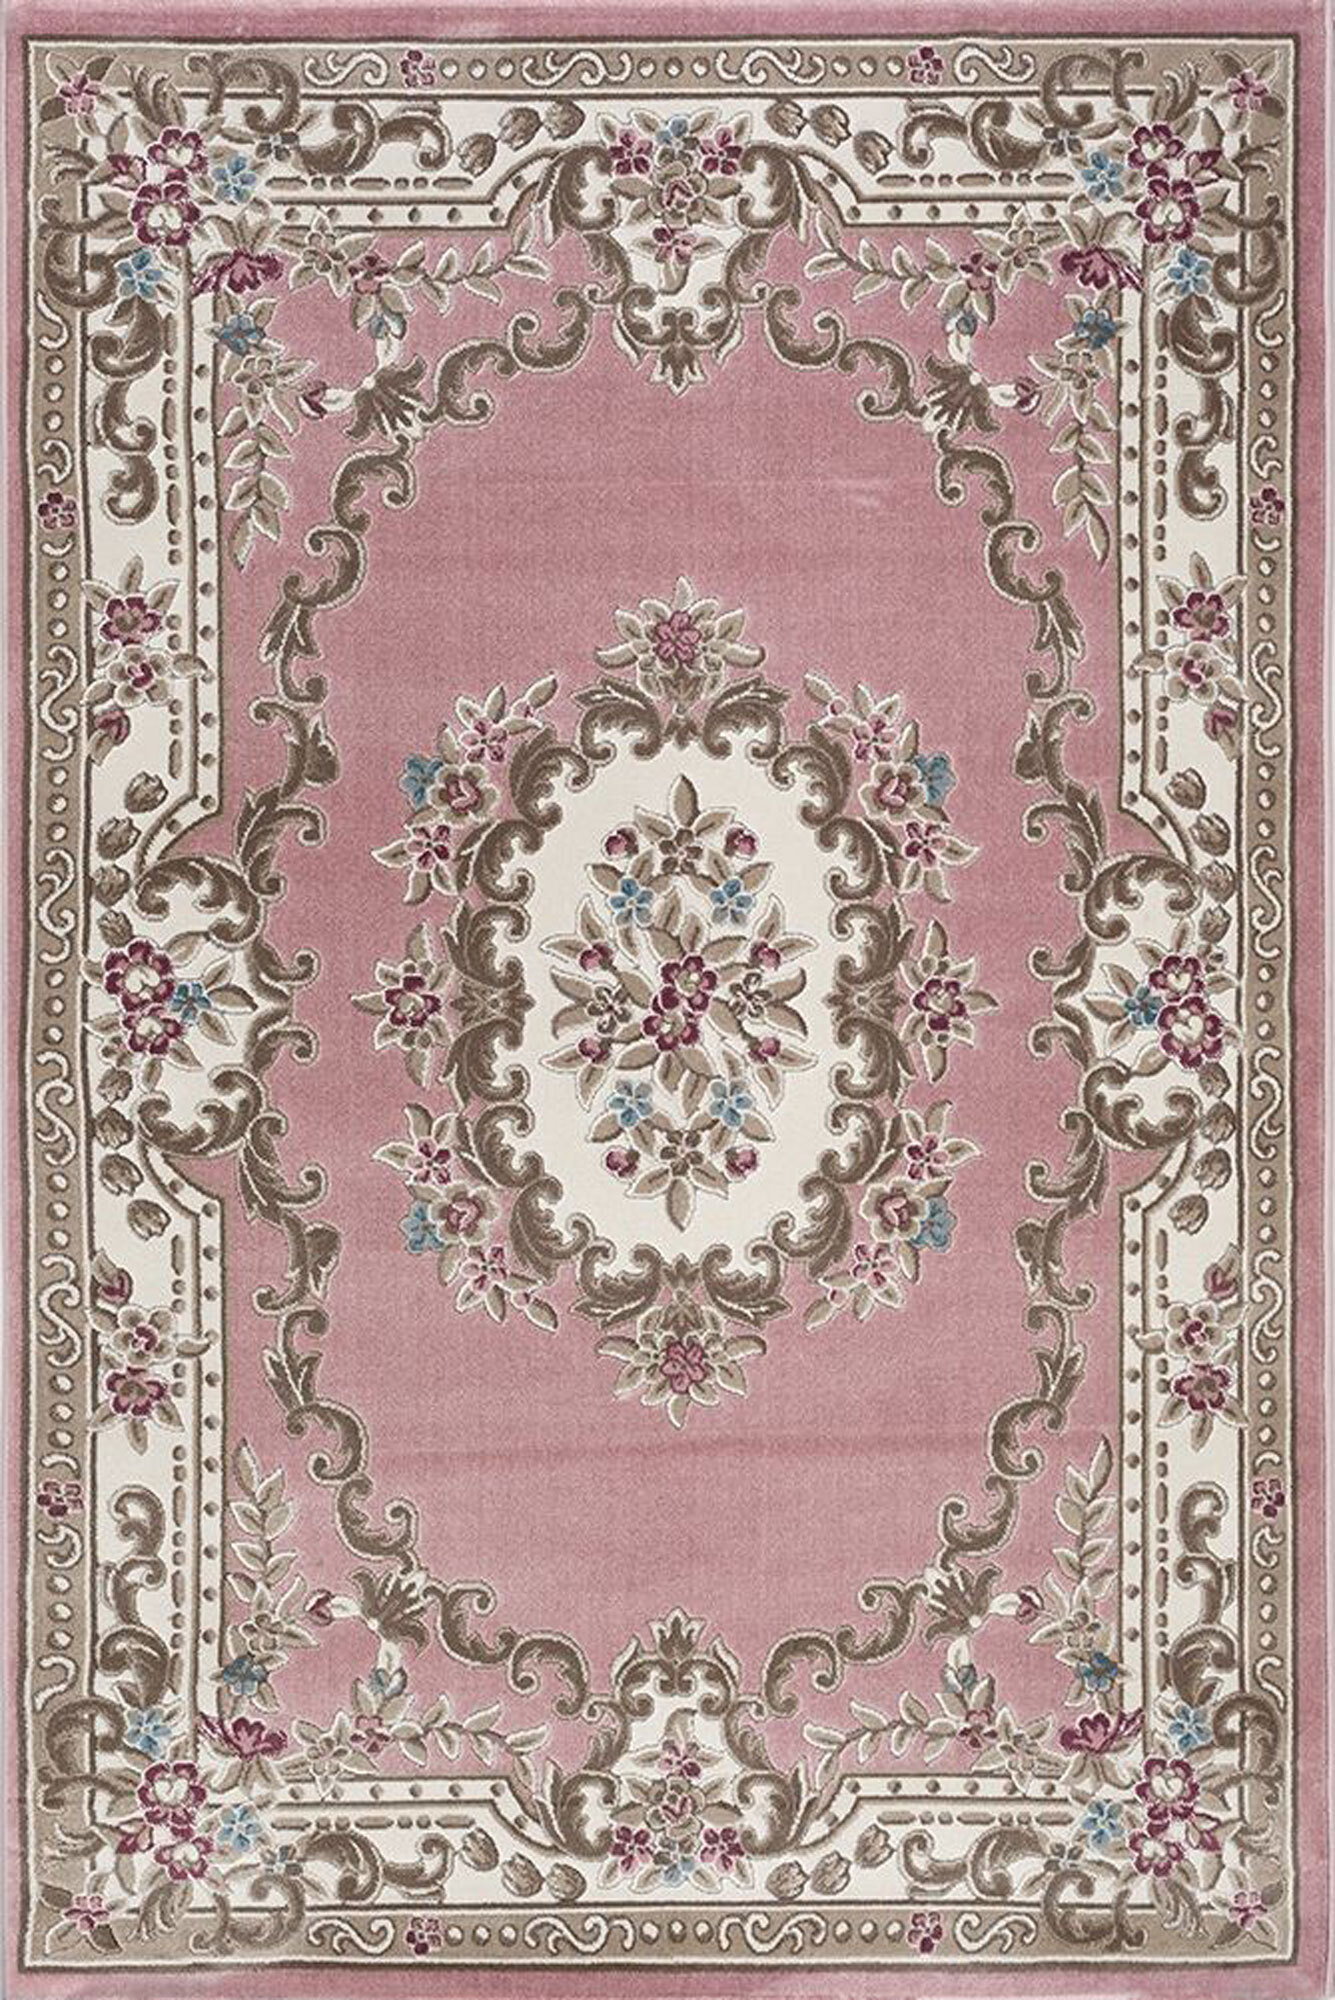 Abbie Pink Aubusson Floral Rugs